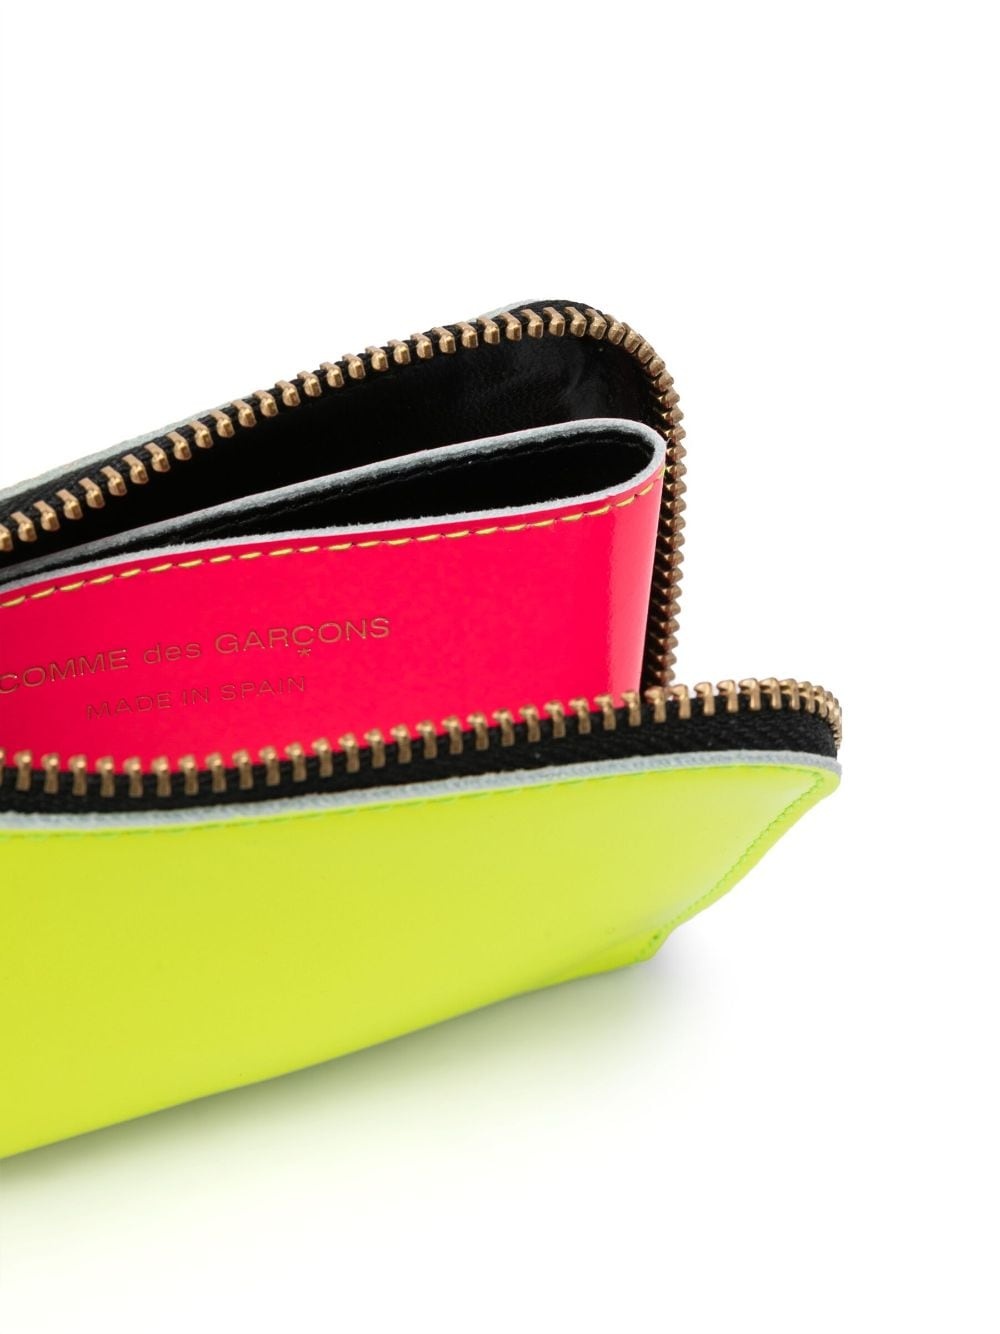 Super Fluo zipped leather wallet - 3